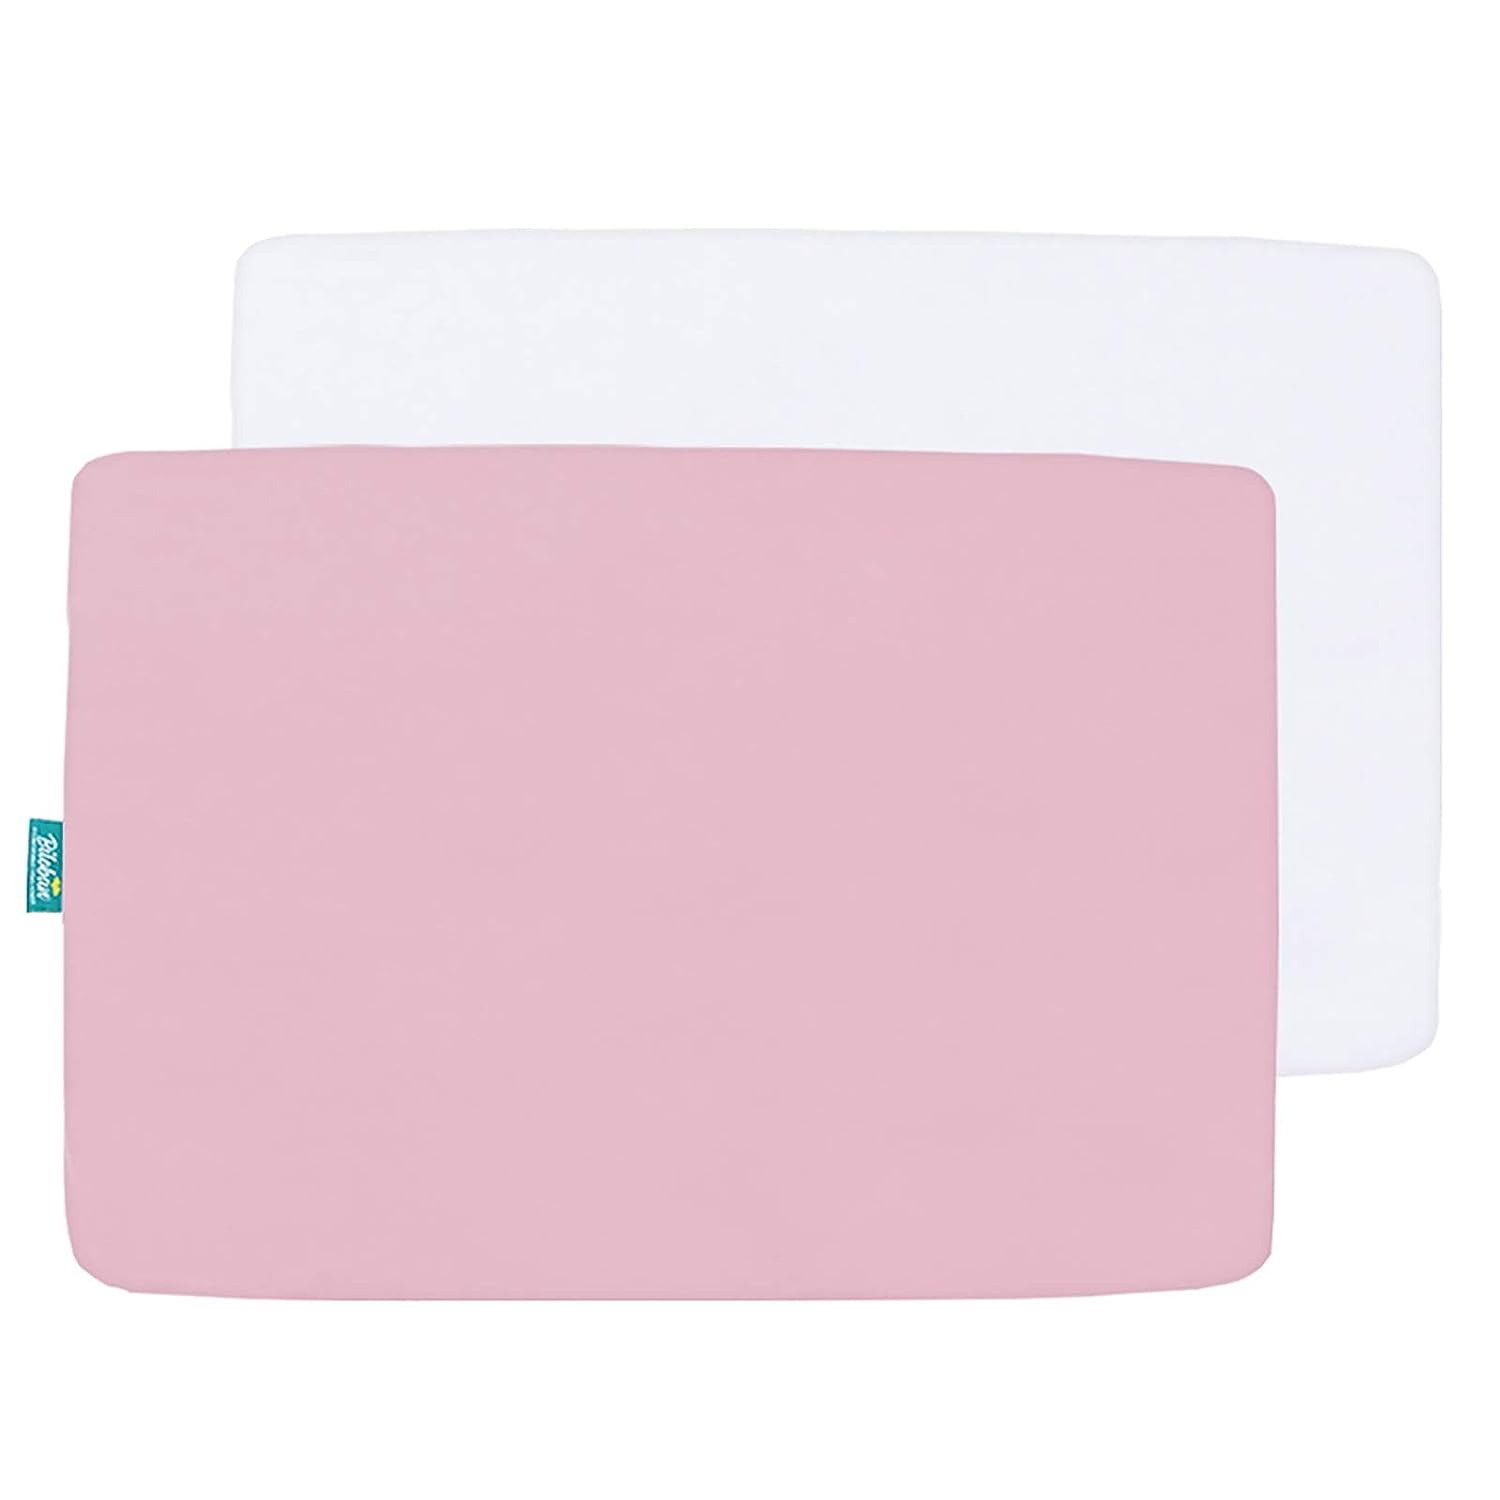 Pack n Play Fitted Sheets - 2 Pack, Ultra Soft Microfiber, Pink & White, Preshrunk - Biloban Online Store